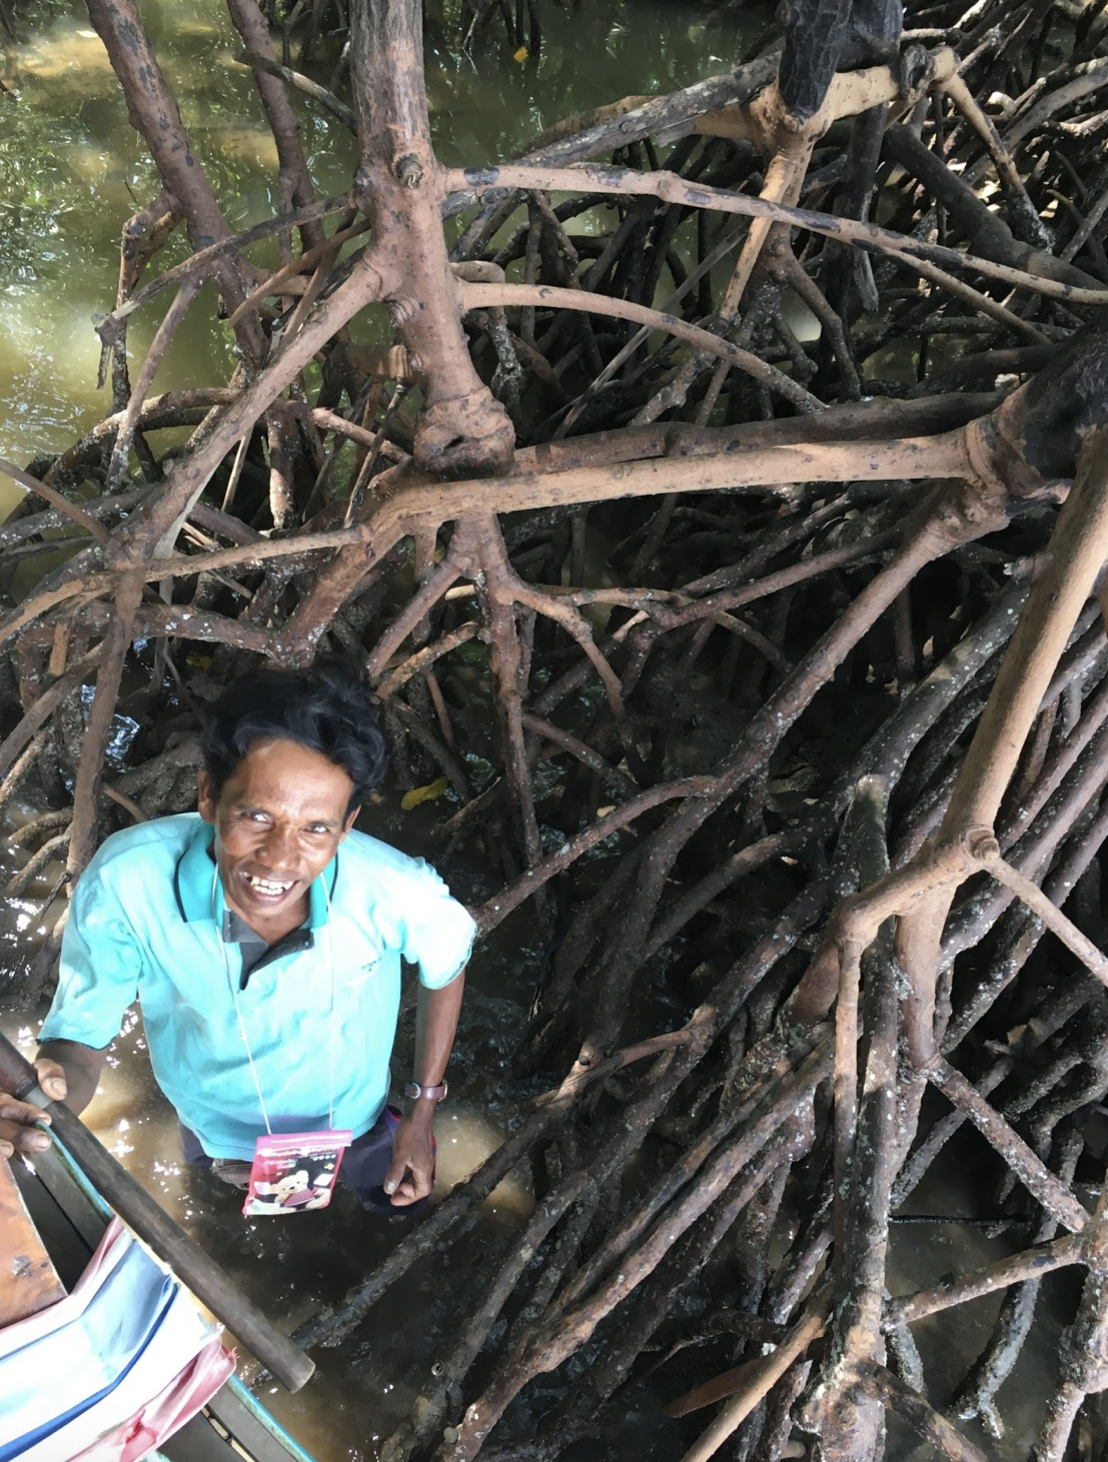 Every mangrove forest is like a safe home for marine animals”: Why mangroves  are important for tropical communities - Mangrove Livelihoods and Ecosystem  Services